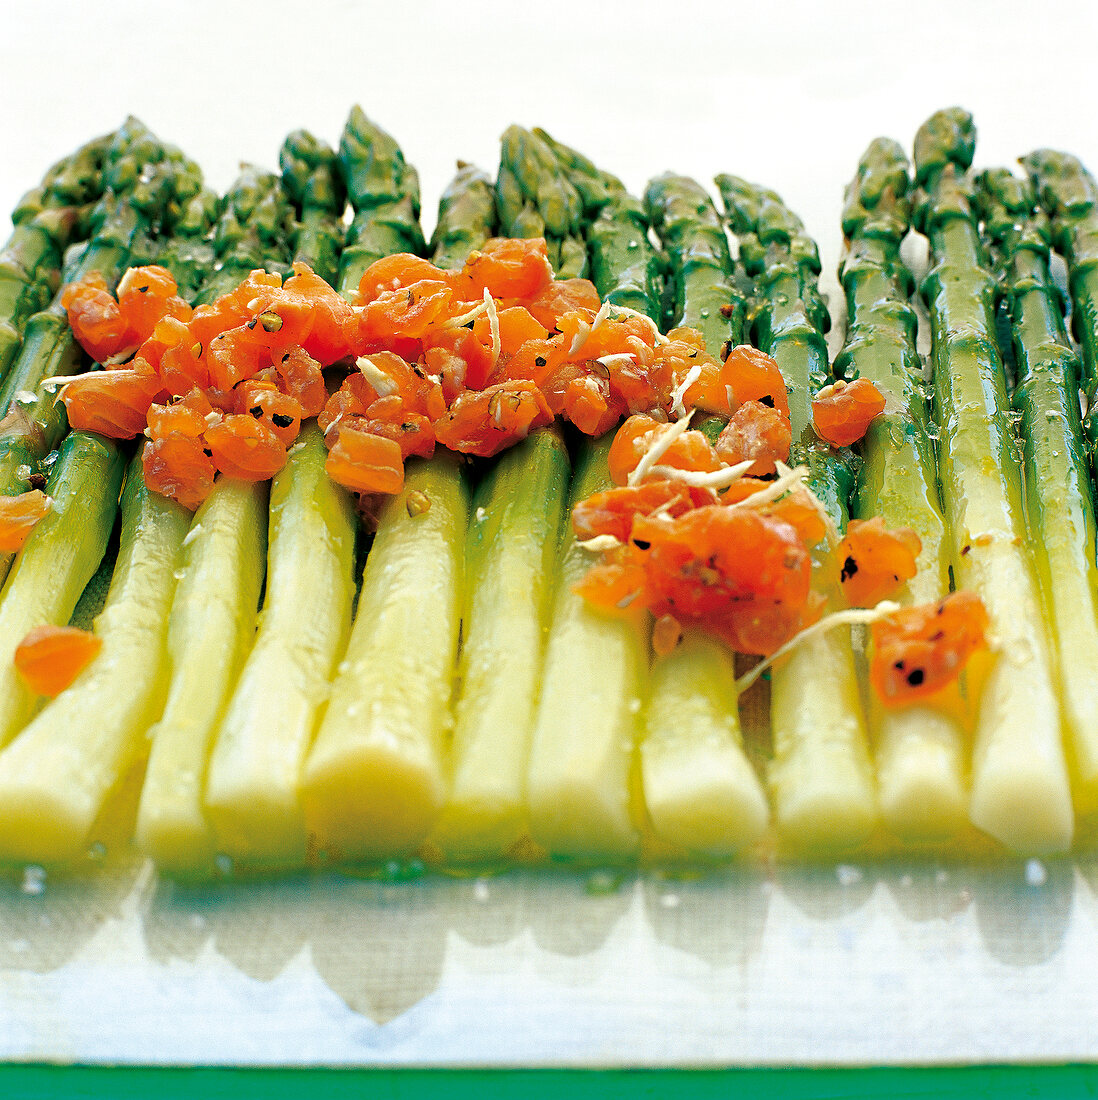 Row of green asparagus garnished with char tartare